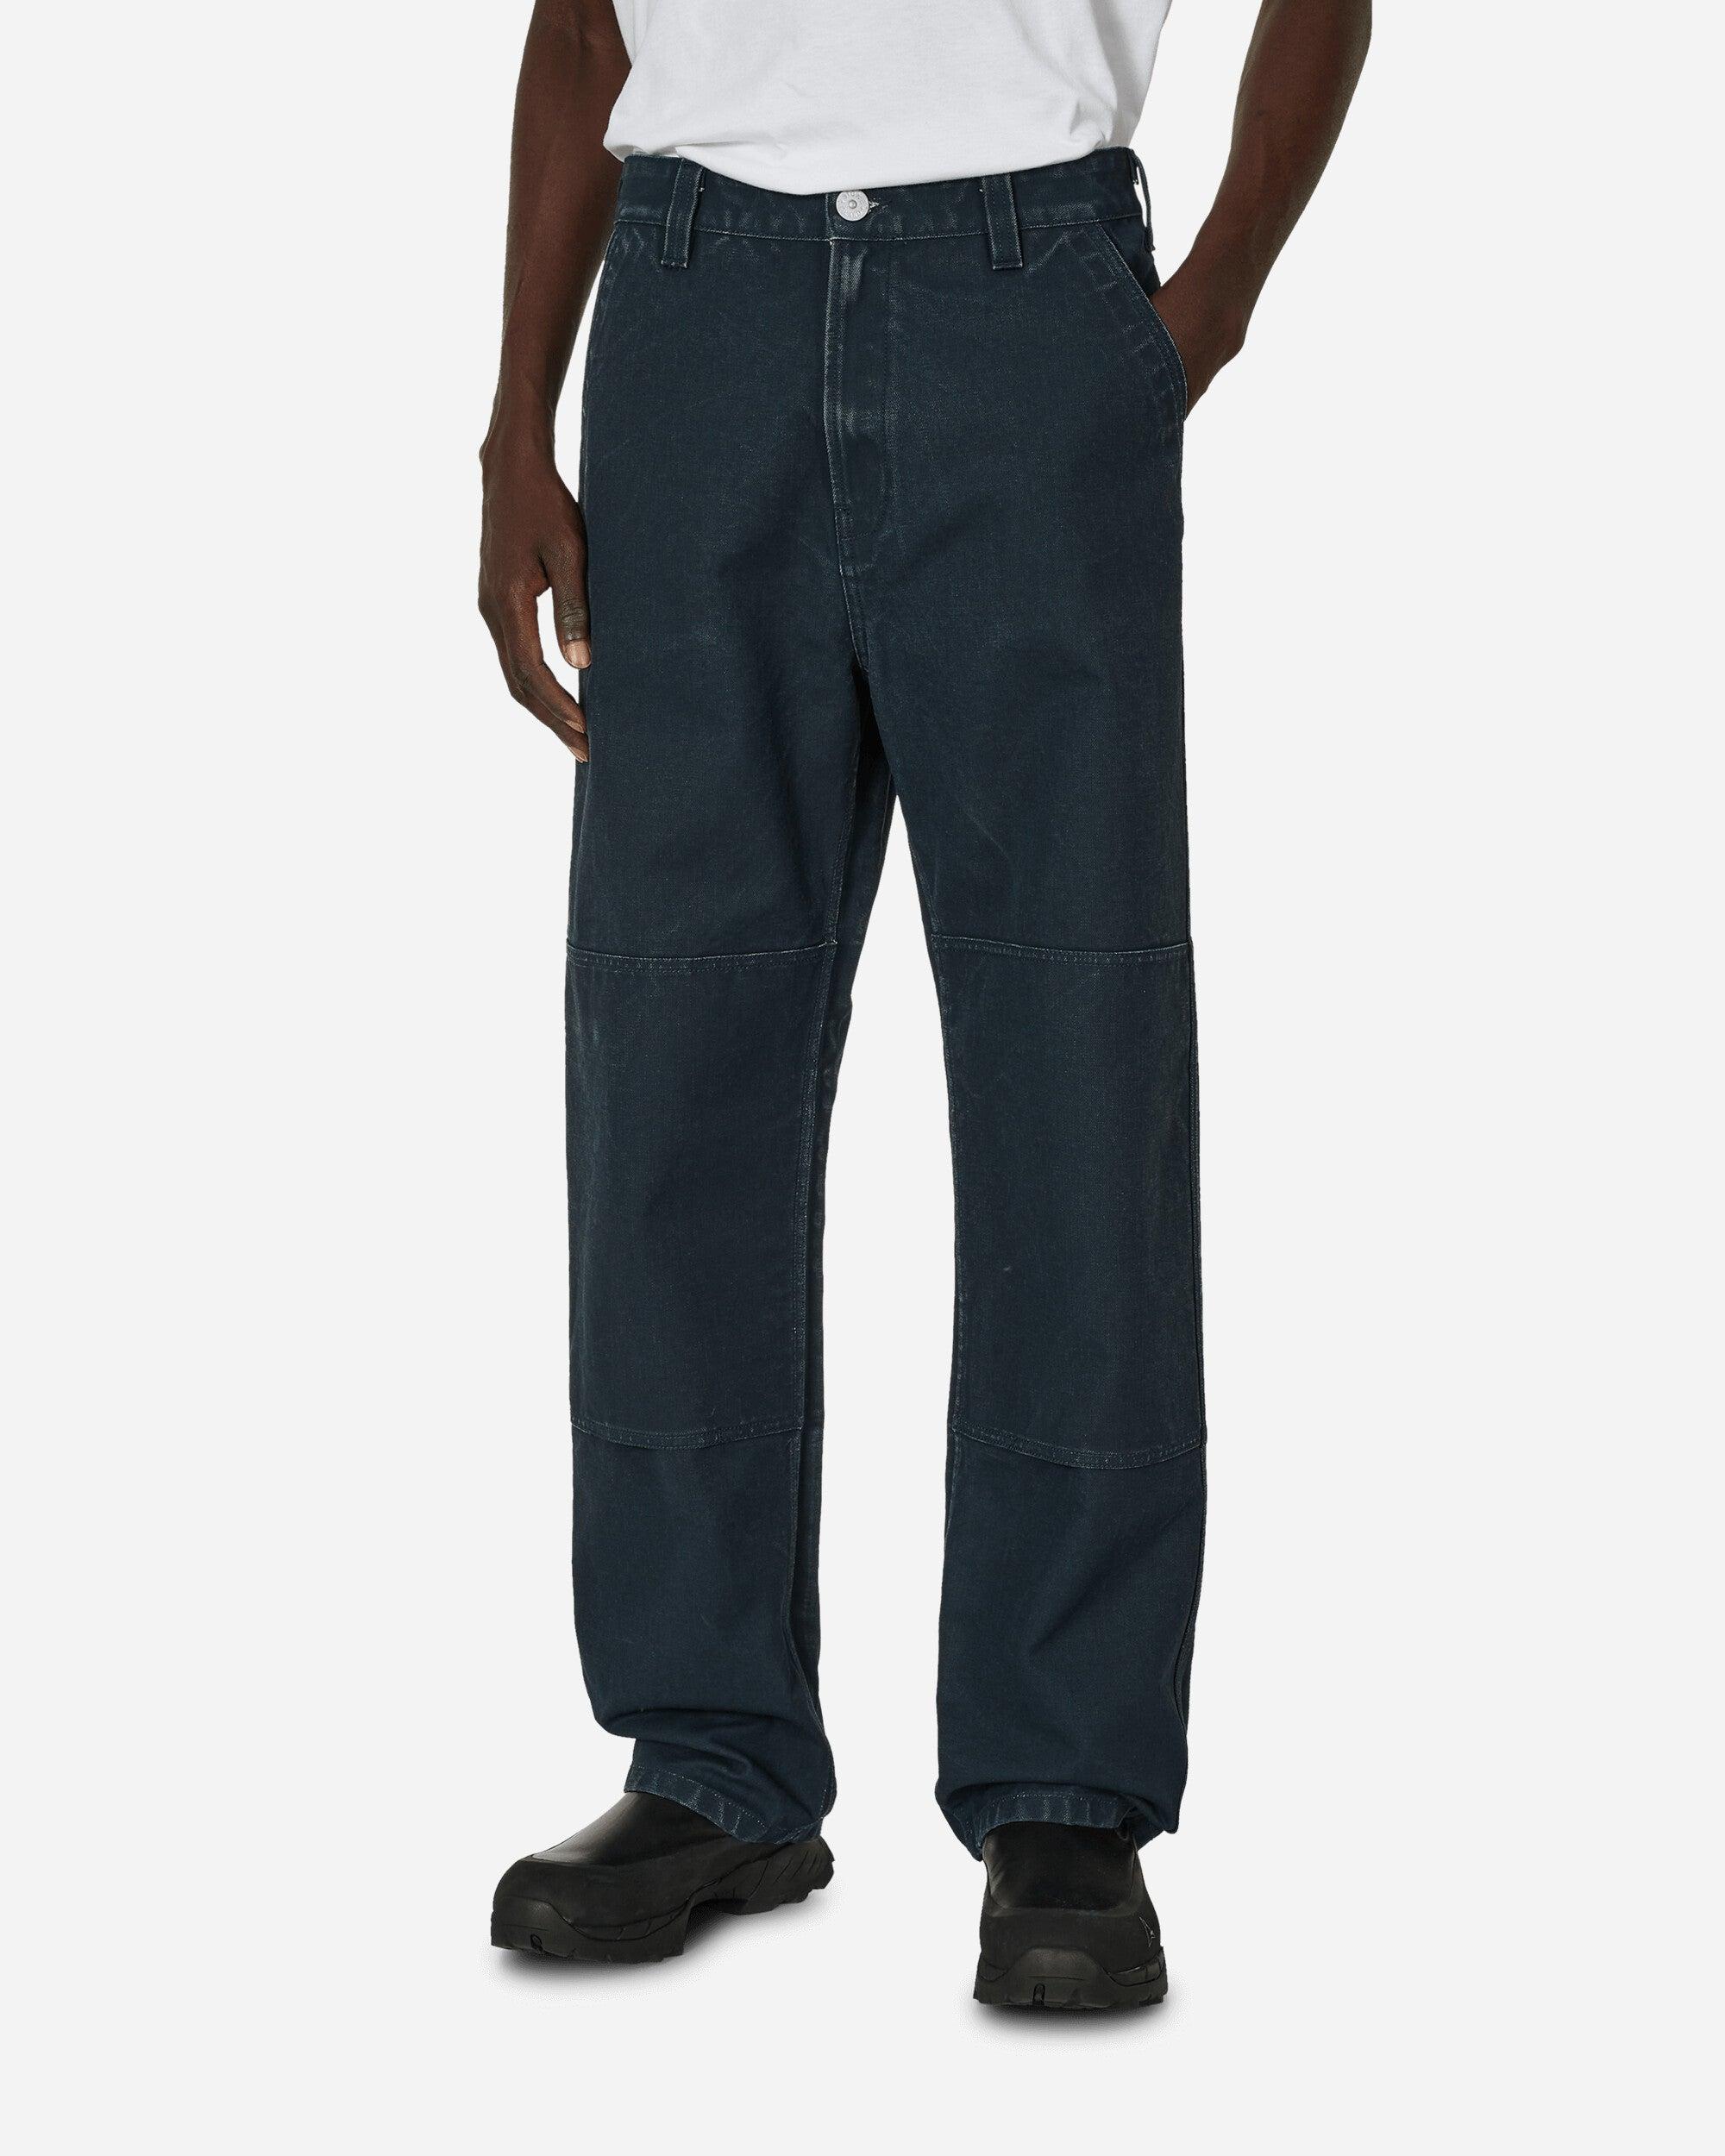 Stone Island Marina Cotton Canvas Trousers in Blue for Men | Lyst UK